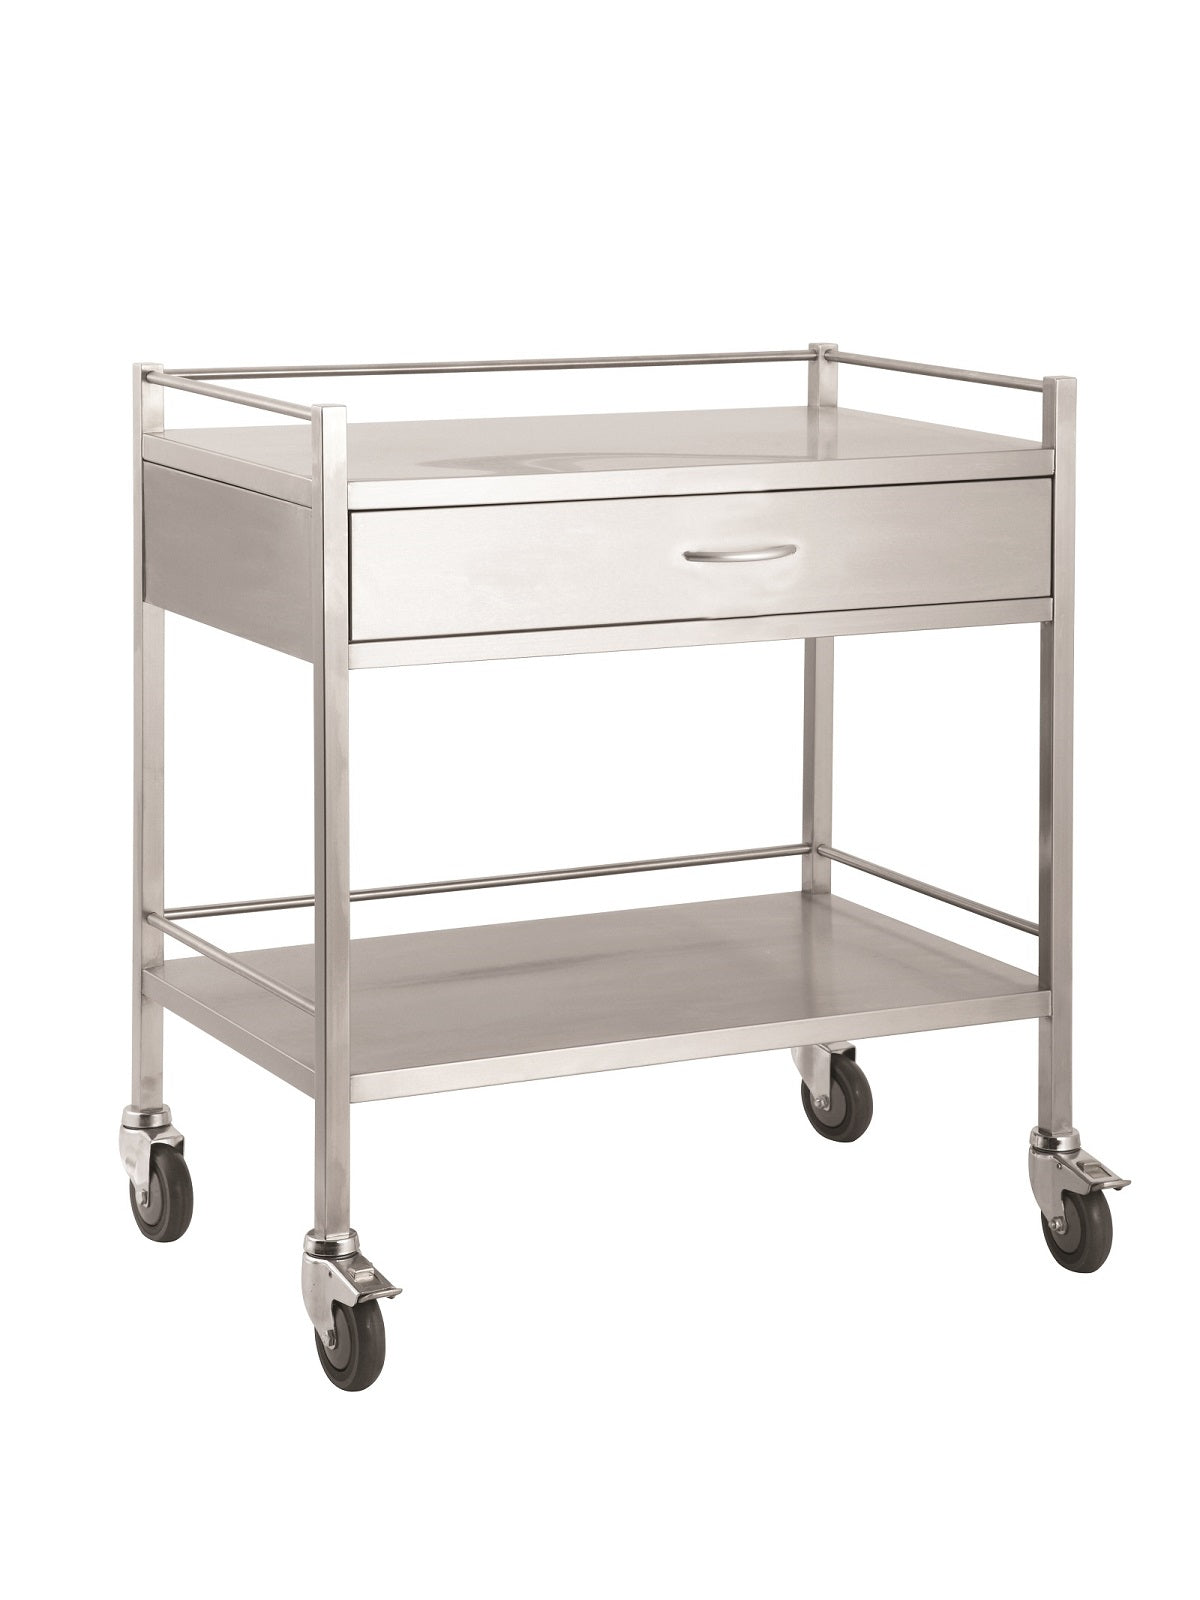 A high grade double stainless steel trolley with one full width drawer. Has top and bottom side rails and lockable castors for safety.